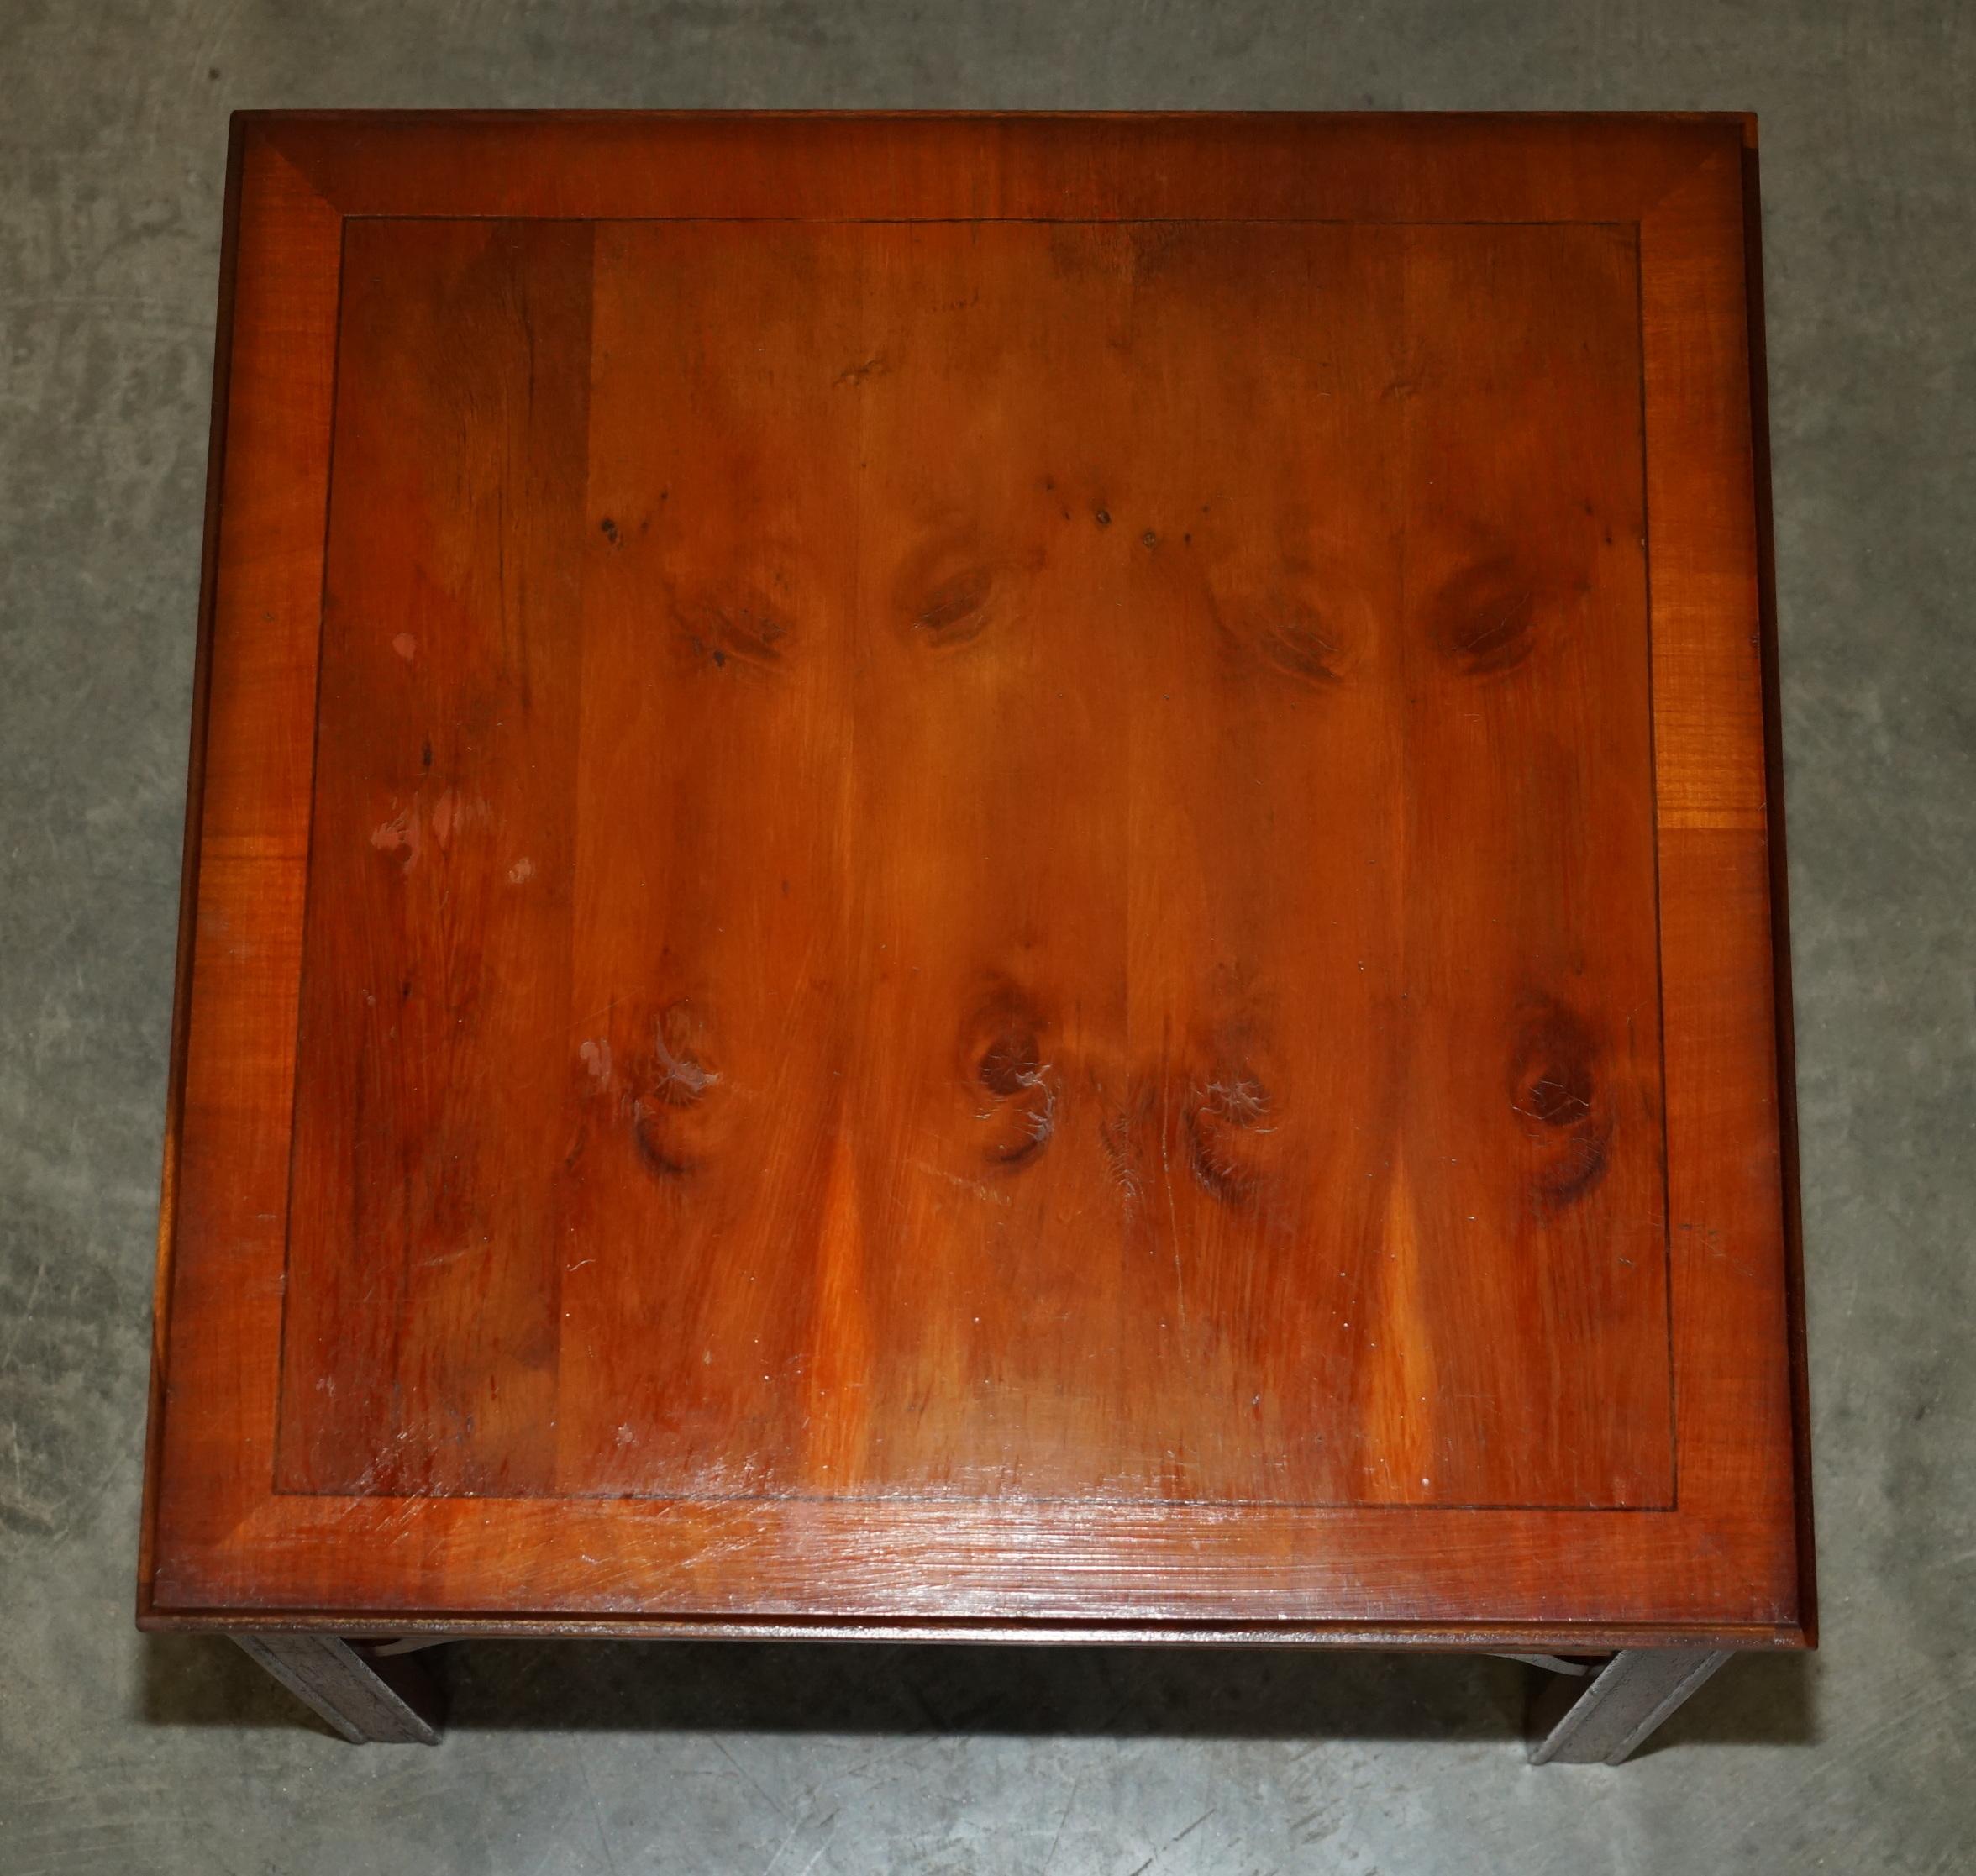 LOVELY PAIR OF BURR YEW WOOD SiDE END LAMP WINE TABLES MIT LARGE SINGLE DRAWERS im Angebot 10